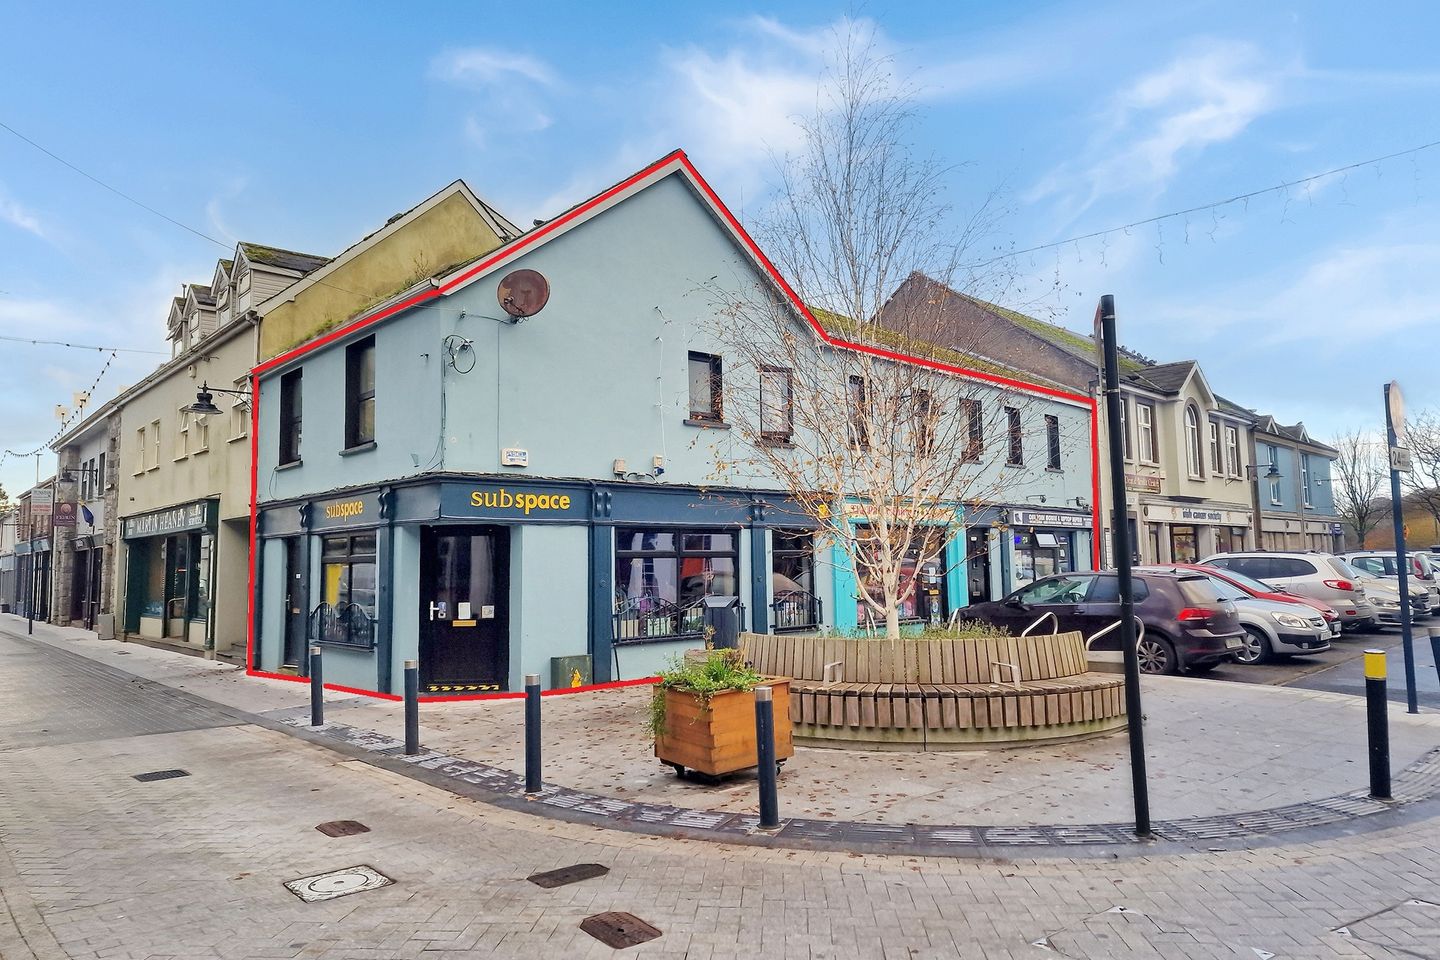 73 Parnell Street, Ennis, Co. Clare